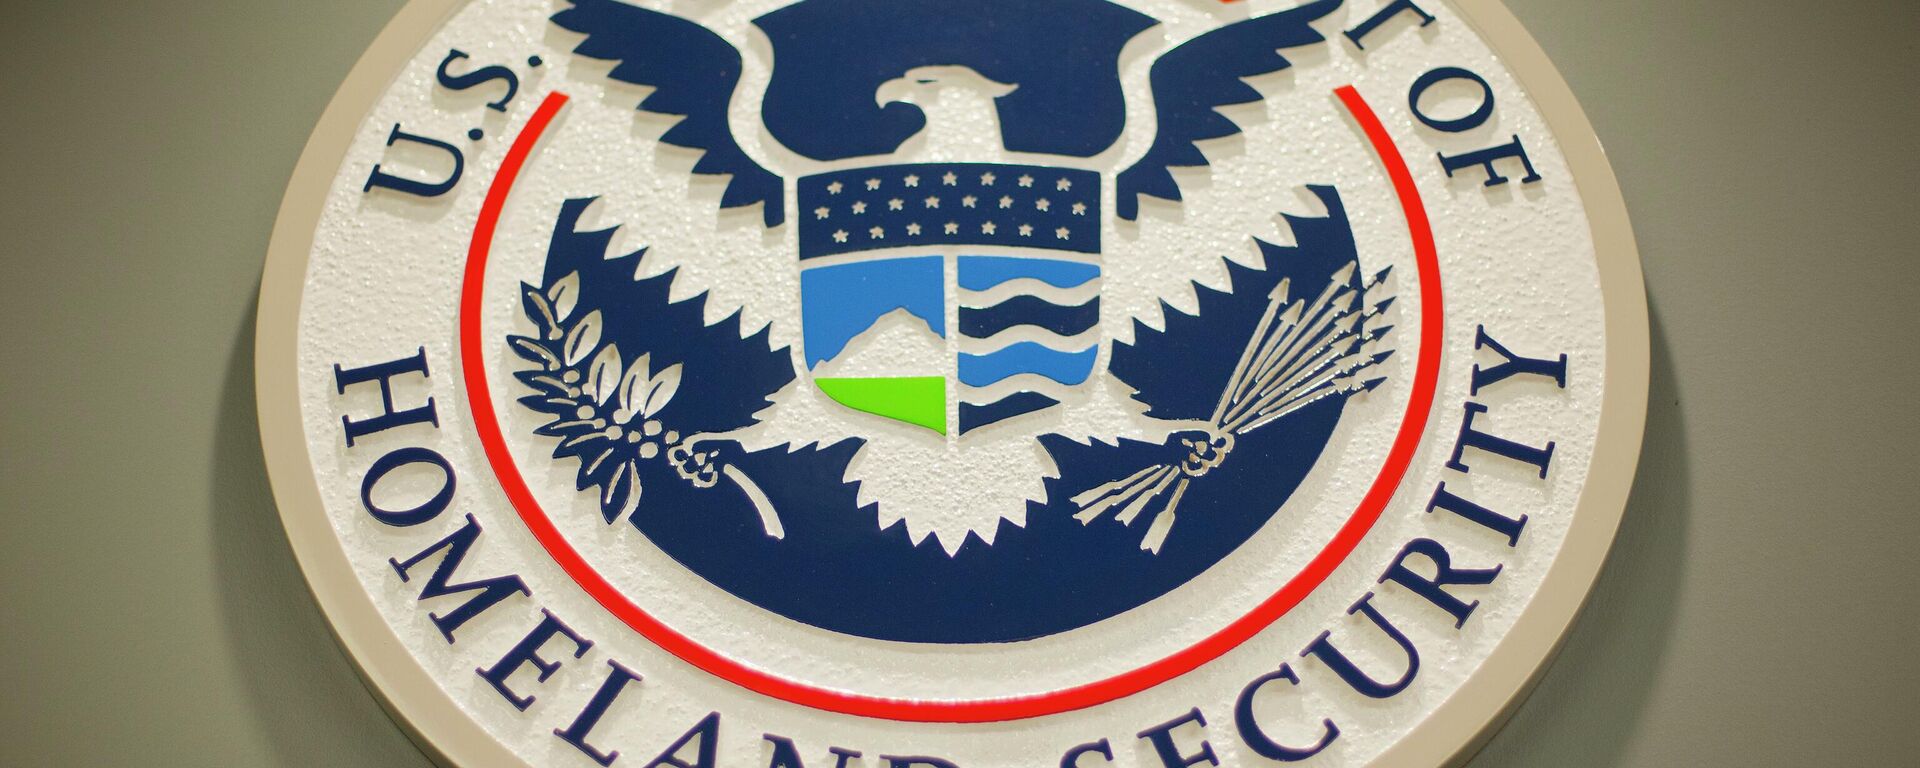 The Homeland Security logo is seen during a joint news conference in Washington, Feb. 25, 2015  - Sputnik International, 1920, 14.08.2022